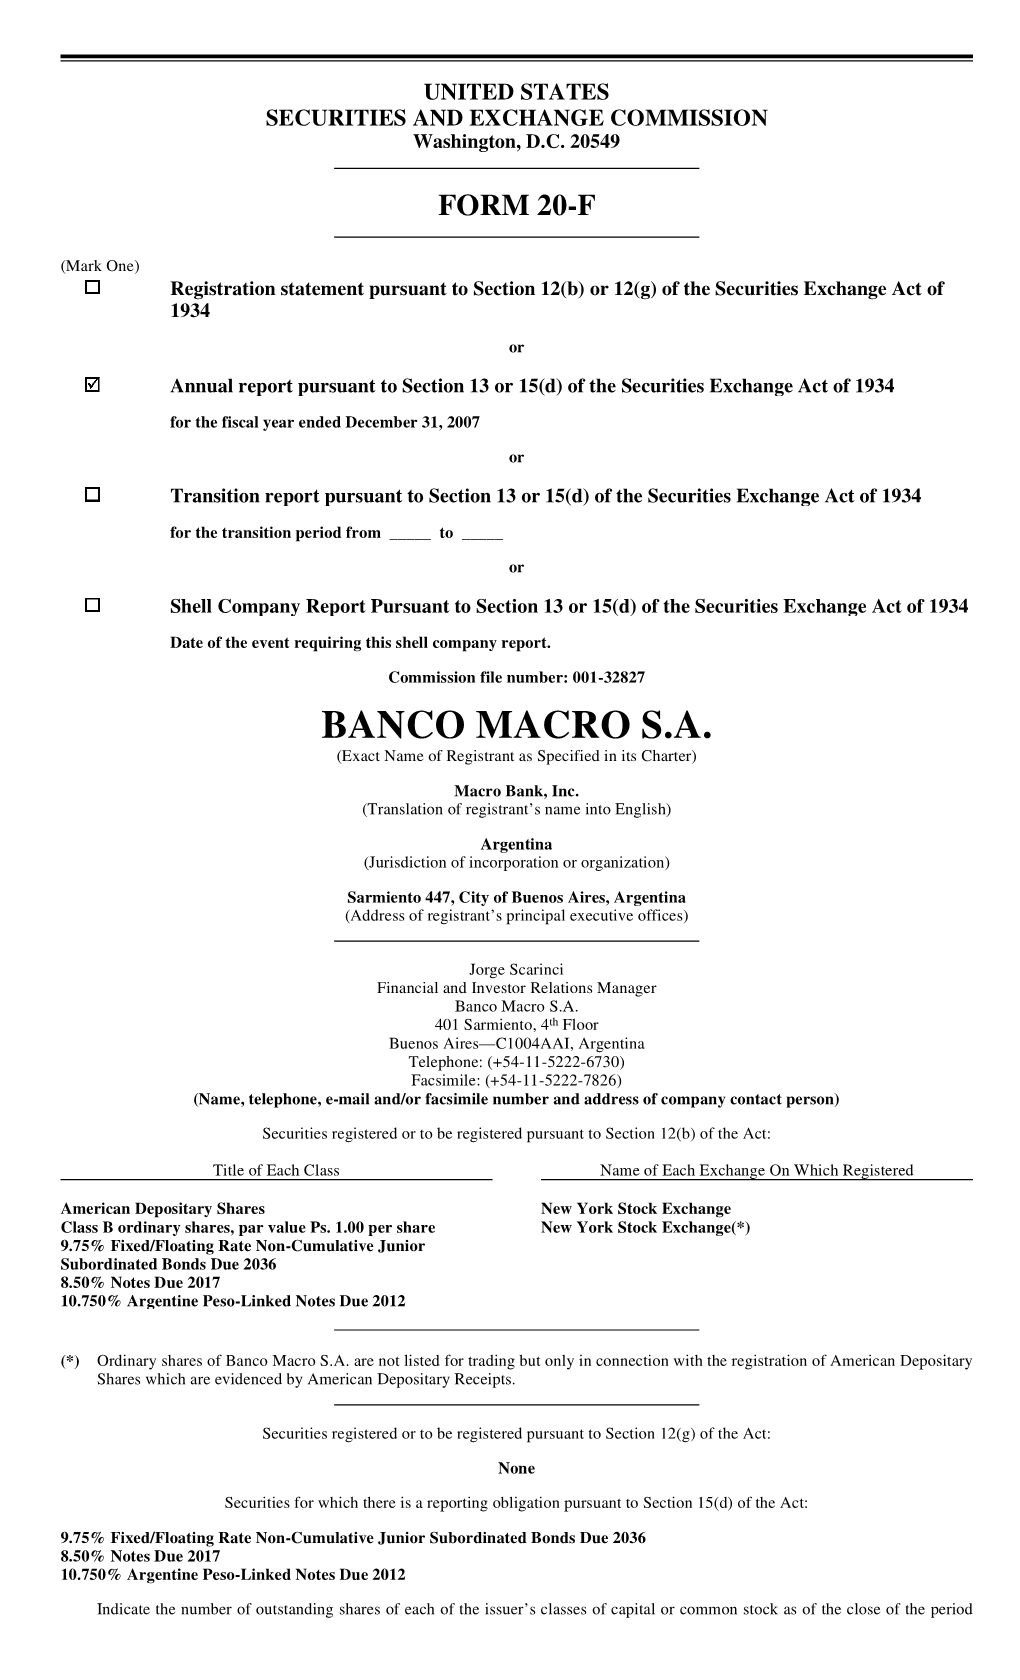 BANCO MACRO S.A. (Exact Name of Registrant As Specified in Its Charter)